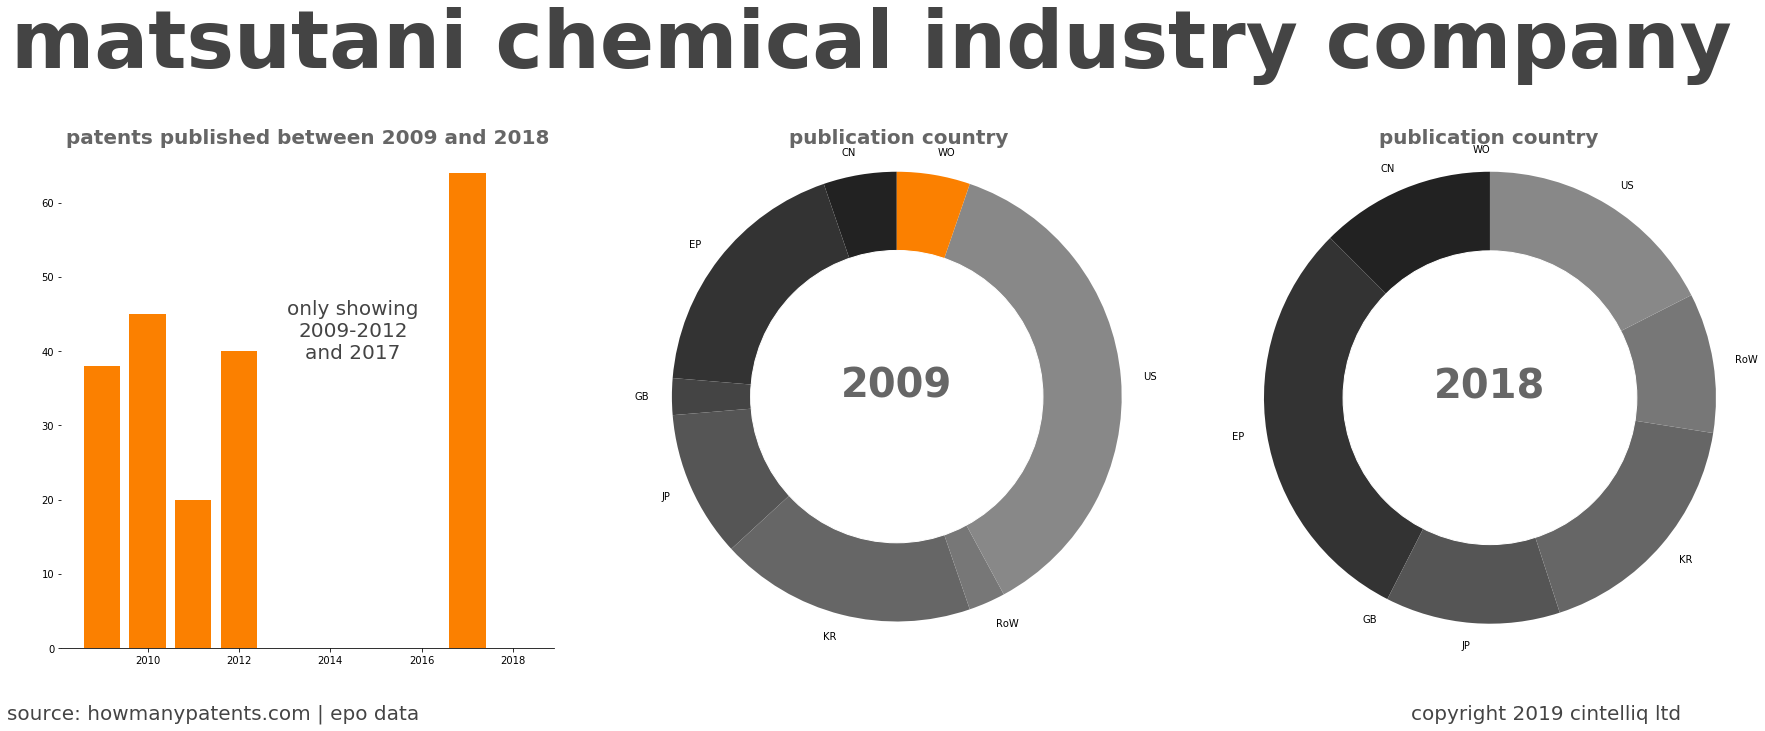 summary of patents for Matsutani Chemical Industry Company